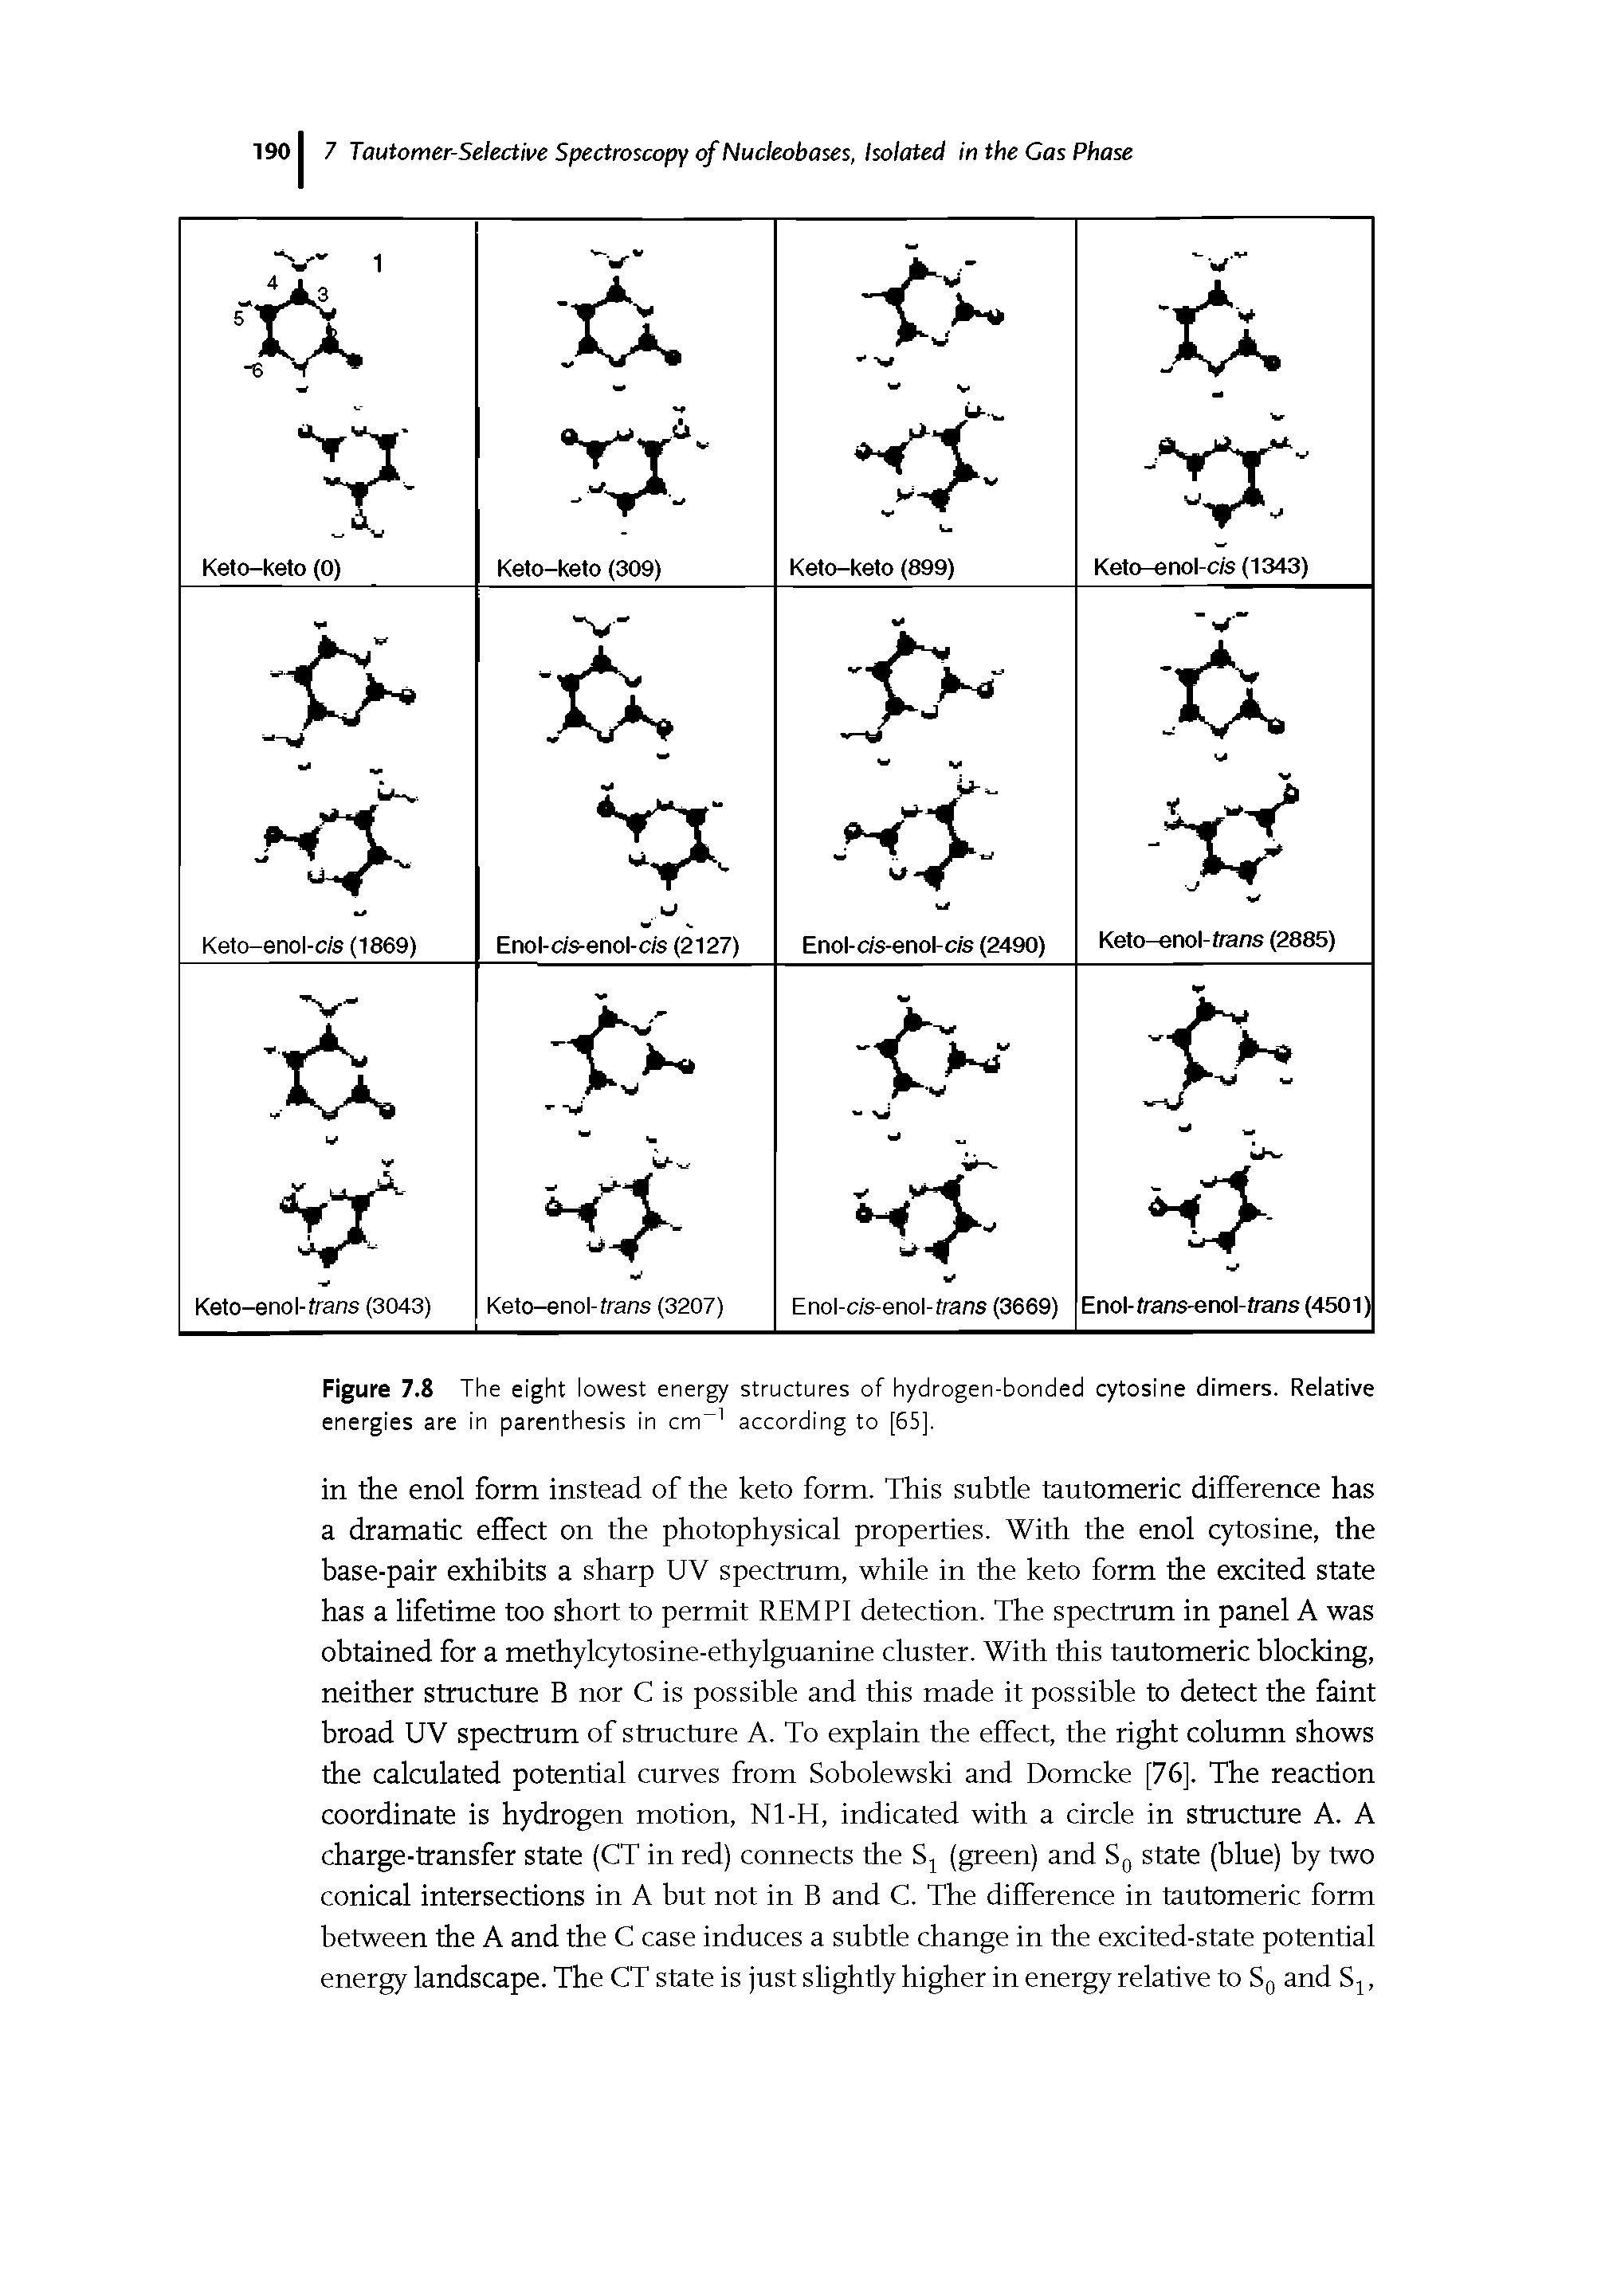 Figure 7.8 The eight lowest energy structures of hydrogen-bonded cytosine dimers. Relative energies are in parenthesis in cm according to [65].